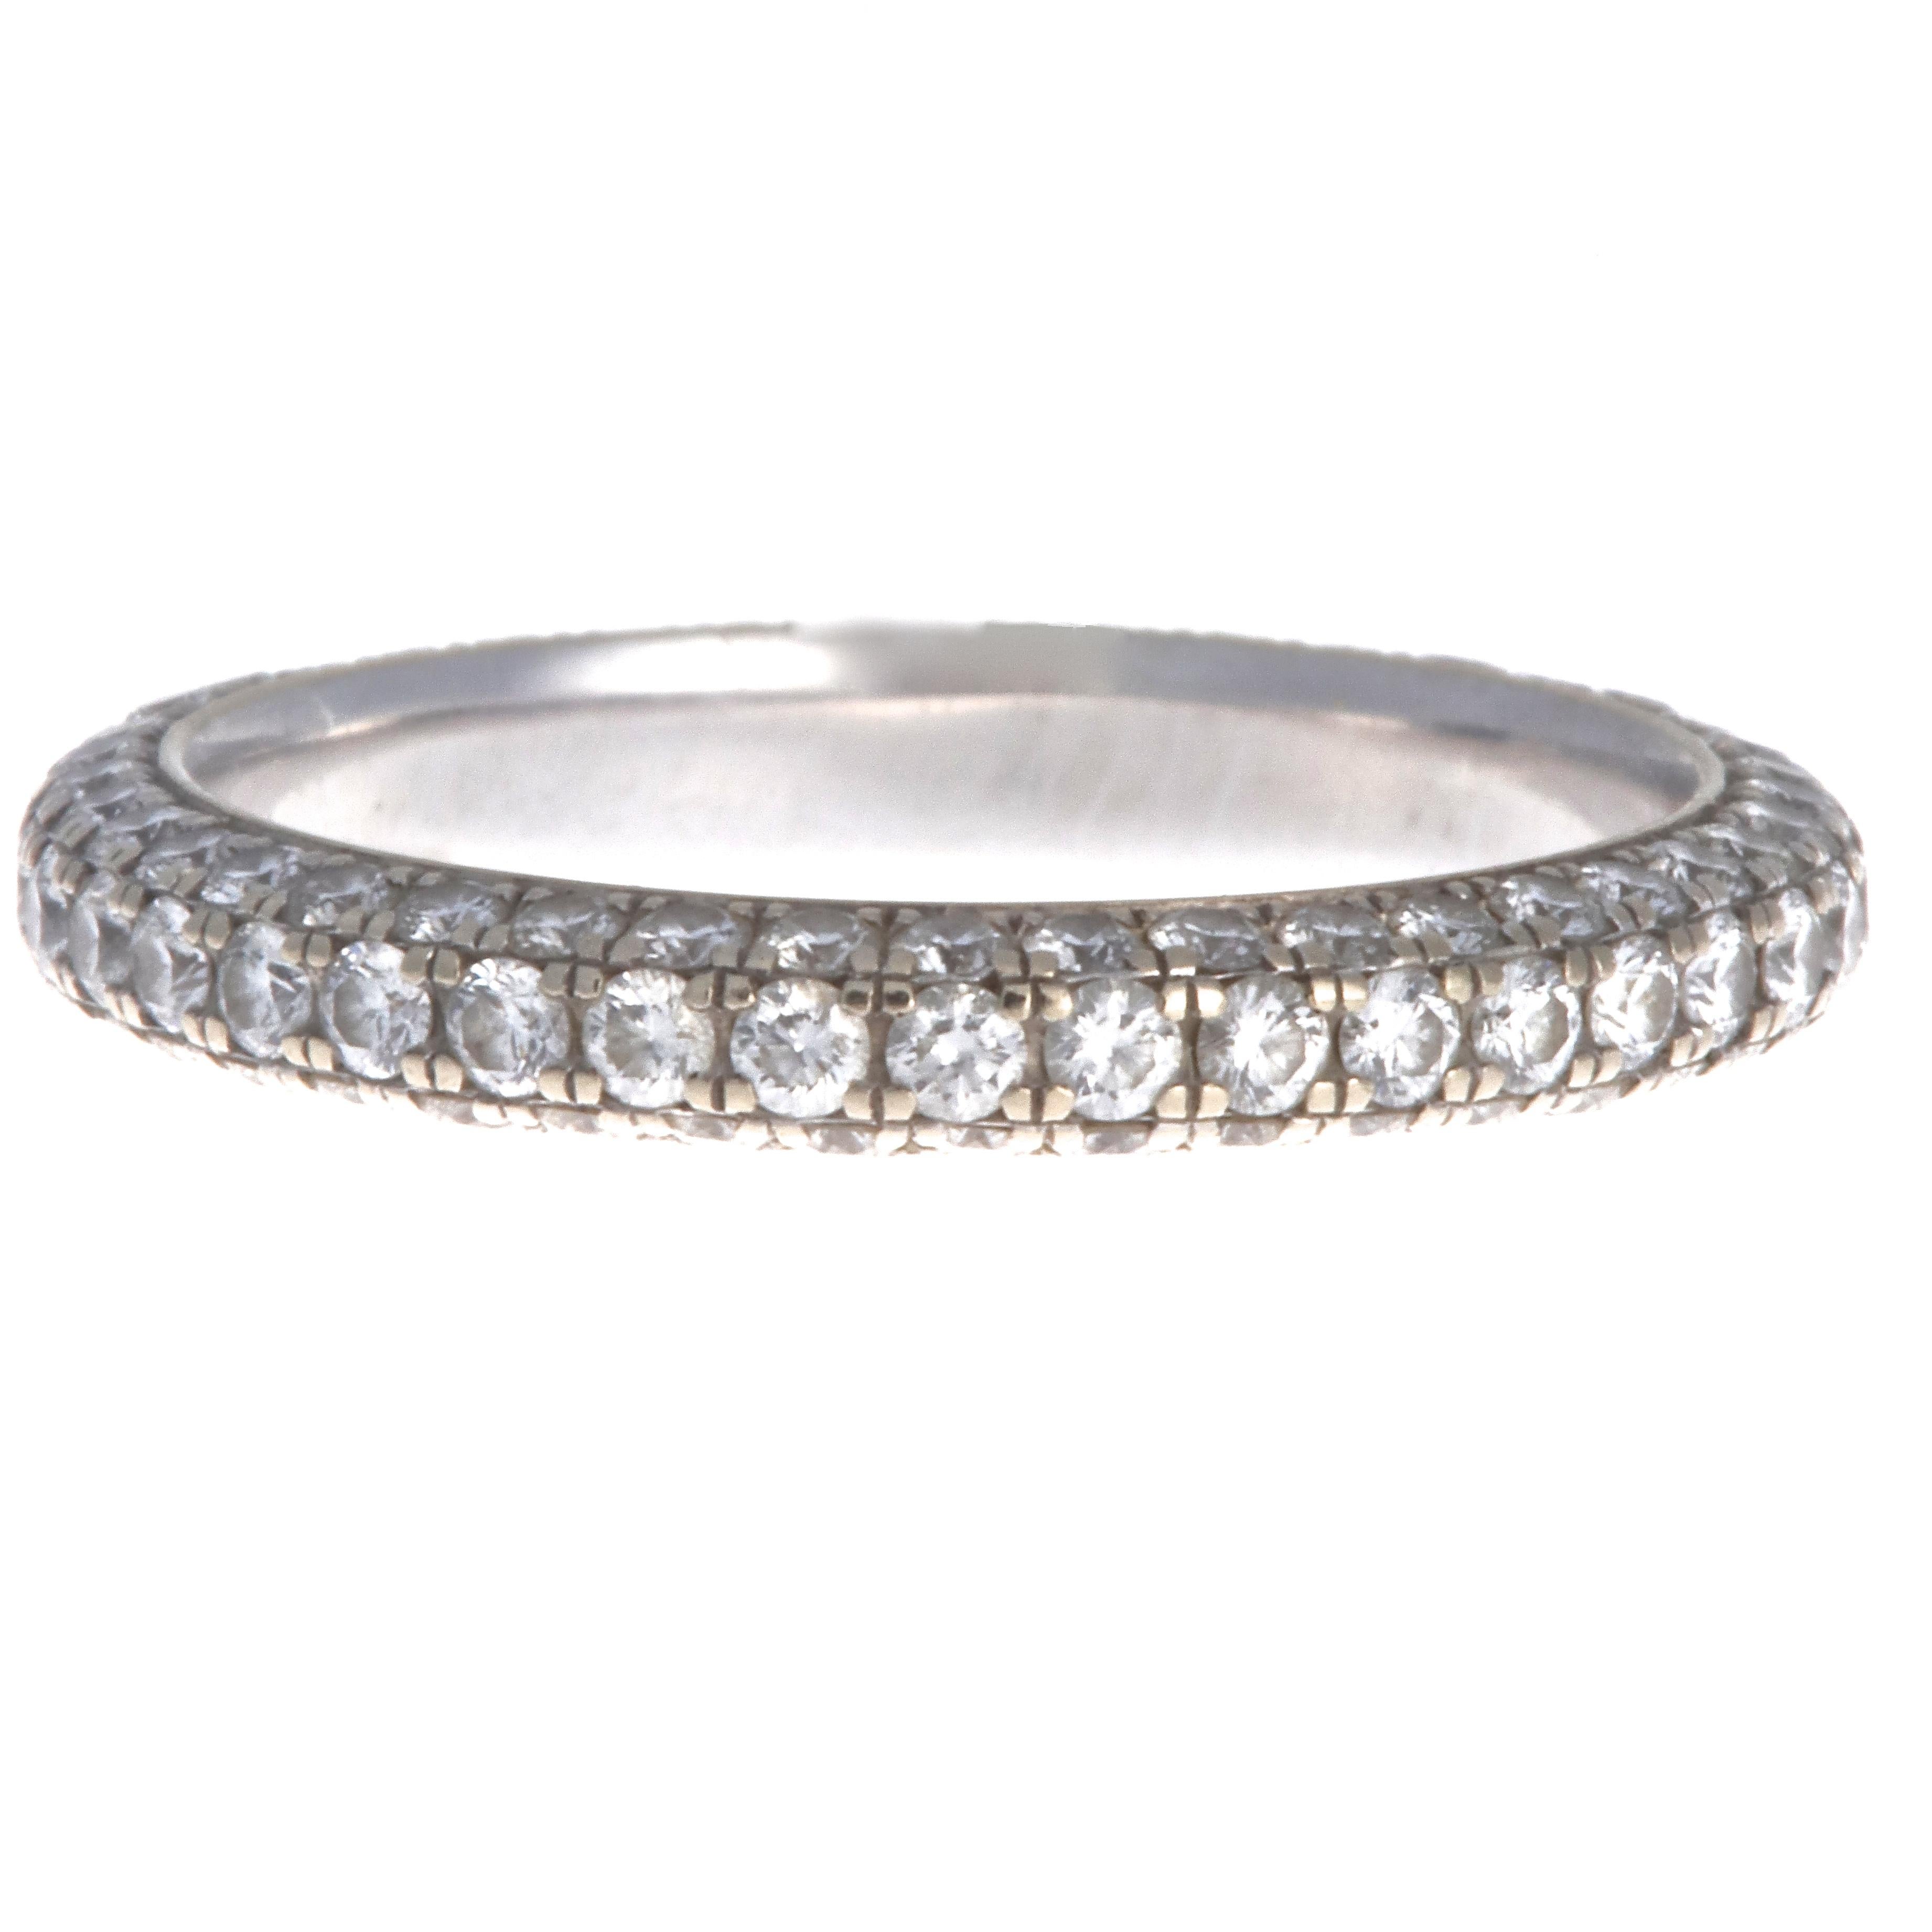 Gorgeous, timeless and classic. Diamonds around the ring as well as on both sides. Featuring 123 diamonds approximately 1.10 carats. A perfect wedding band or an everyday eternity band. This design will never go out of style and all the diamonds